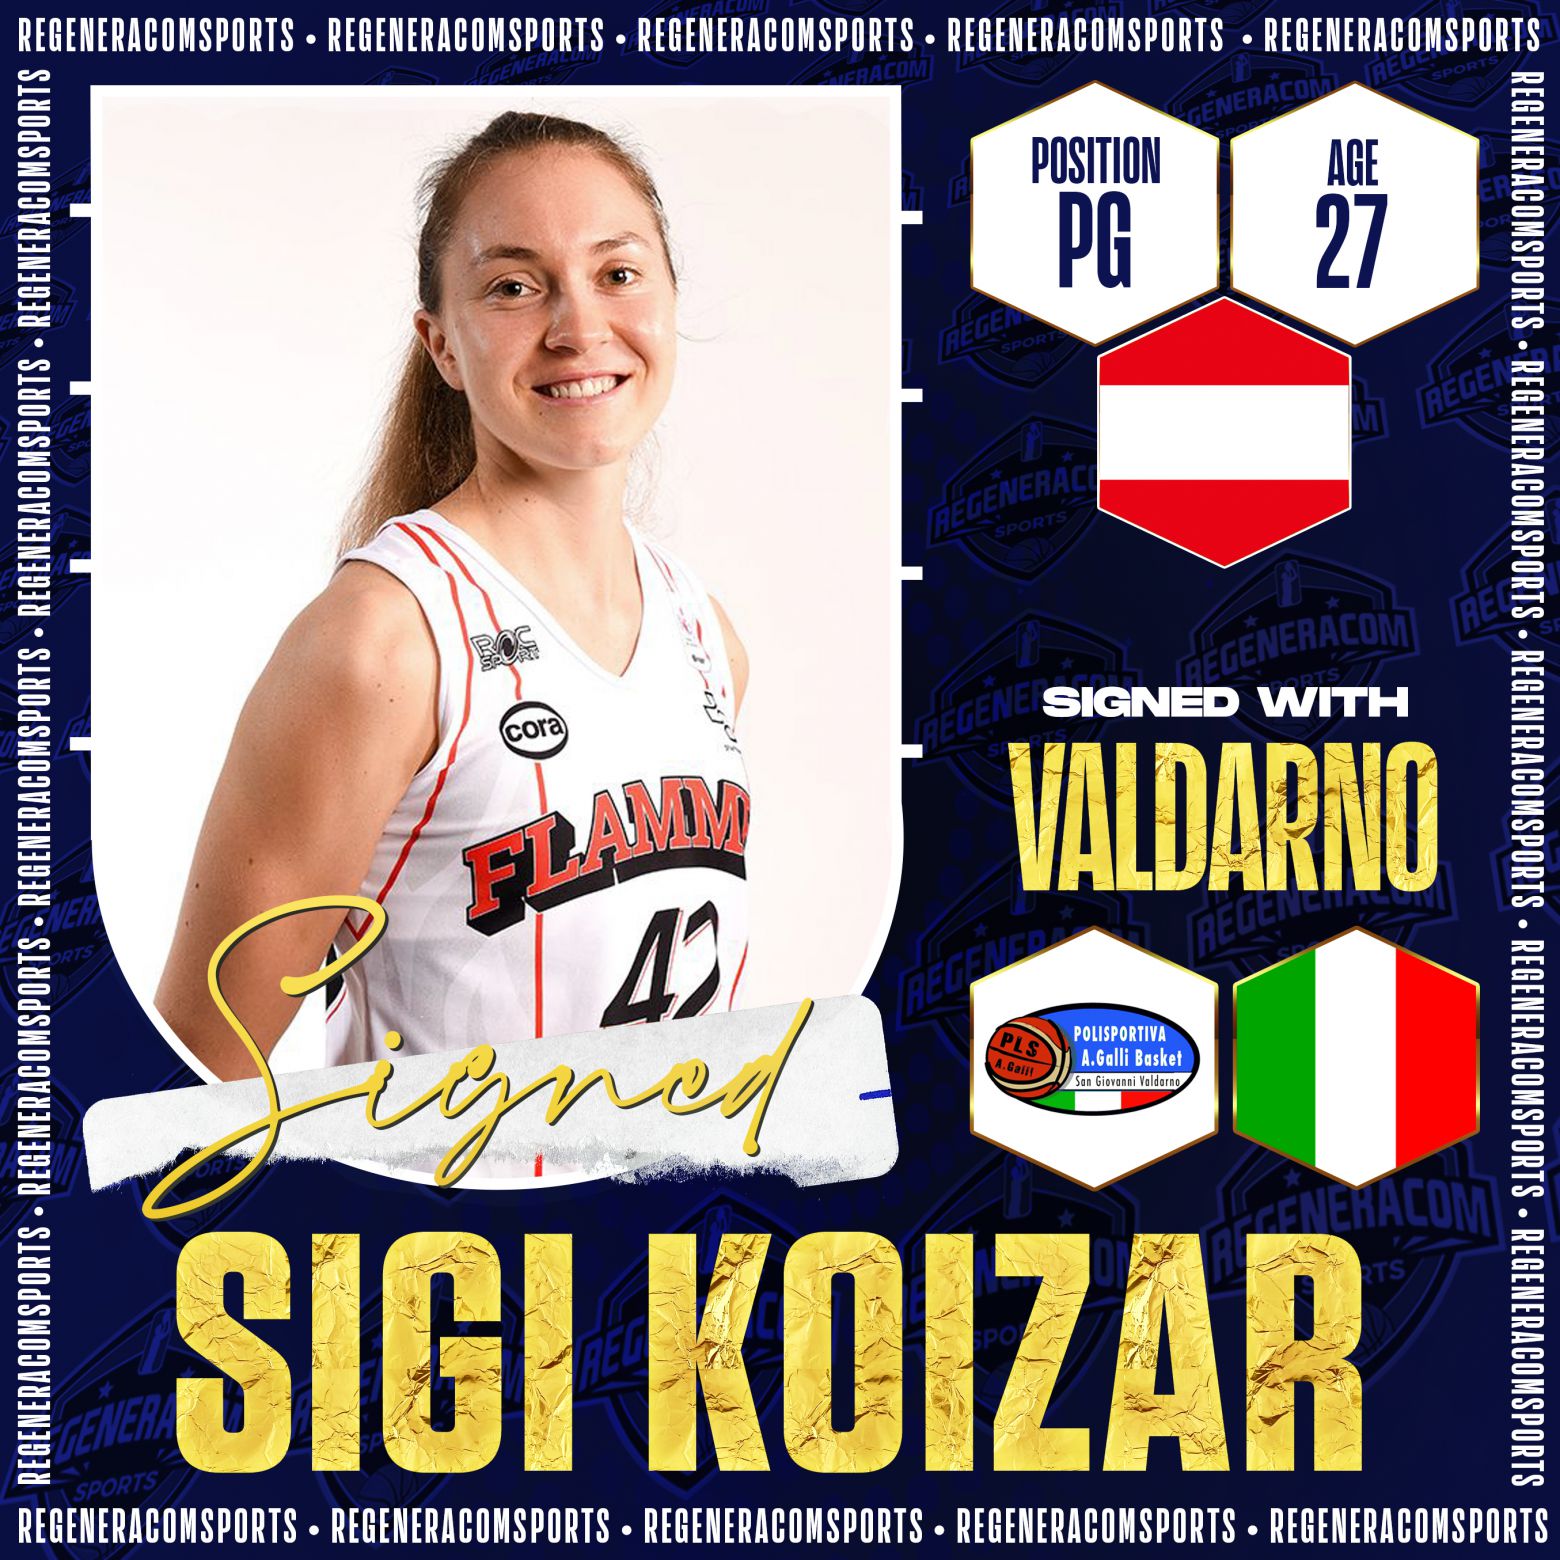 SIGI KOIZAR has signed in Italy with Valdarno until the end of the 2022/23 season